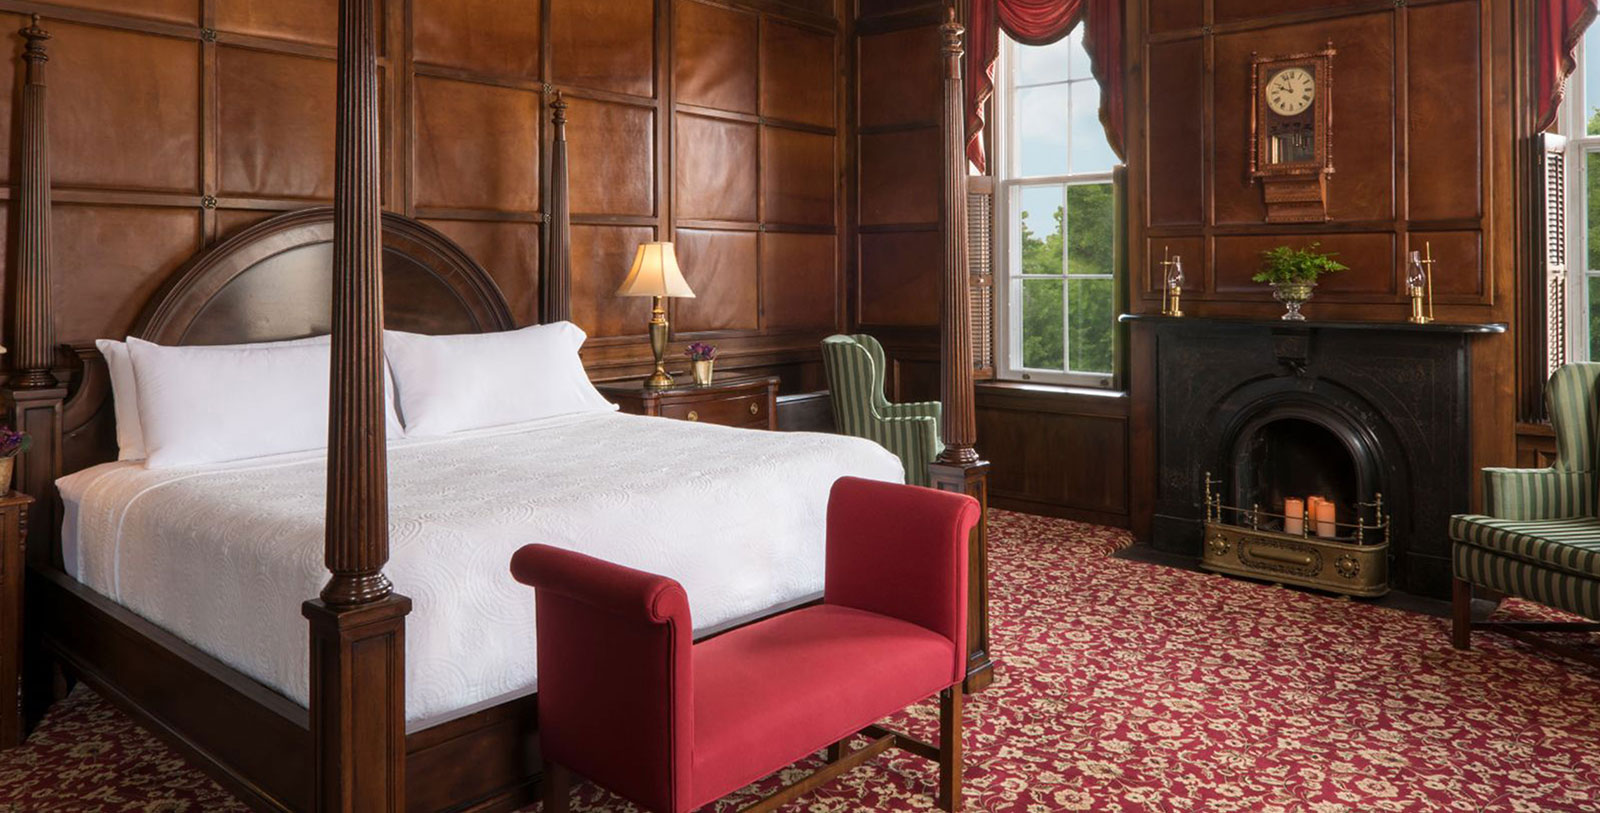 Image of Guestroom Interior St. James Hotel, 1875, Member of Historic Hotels of America, in Red Wing, Minnesota, Accommodations